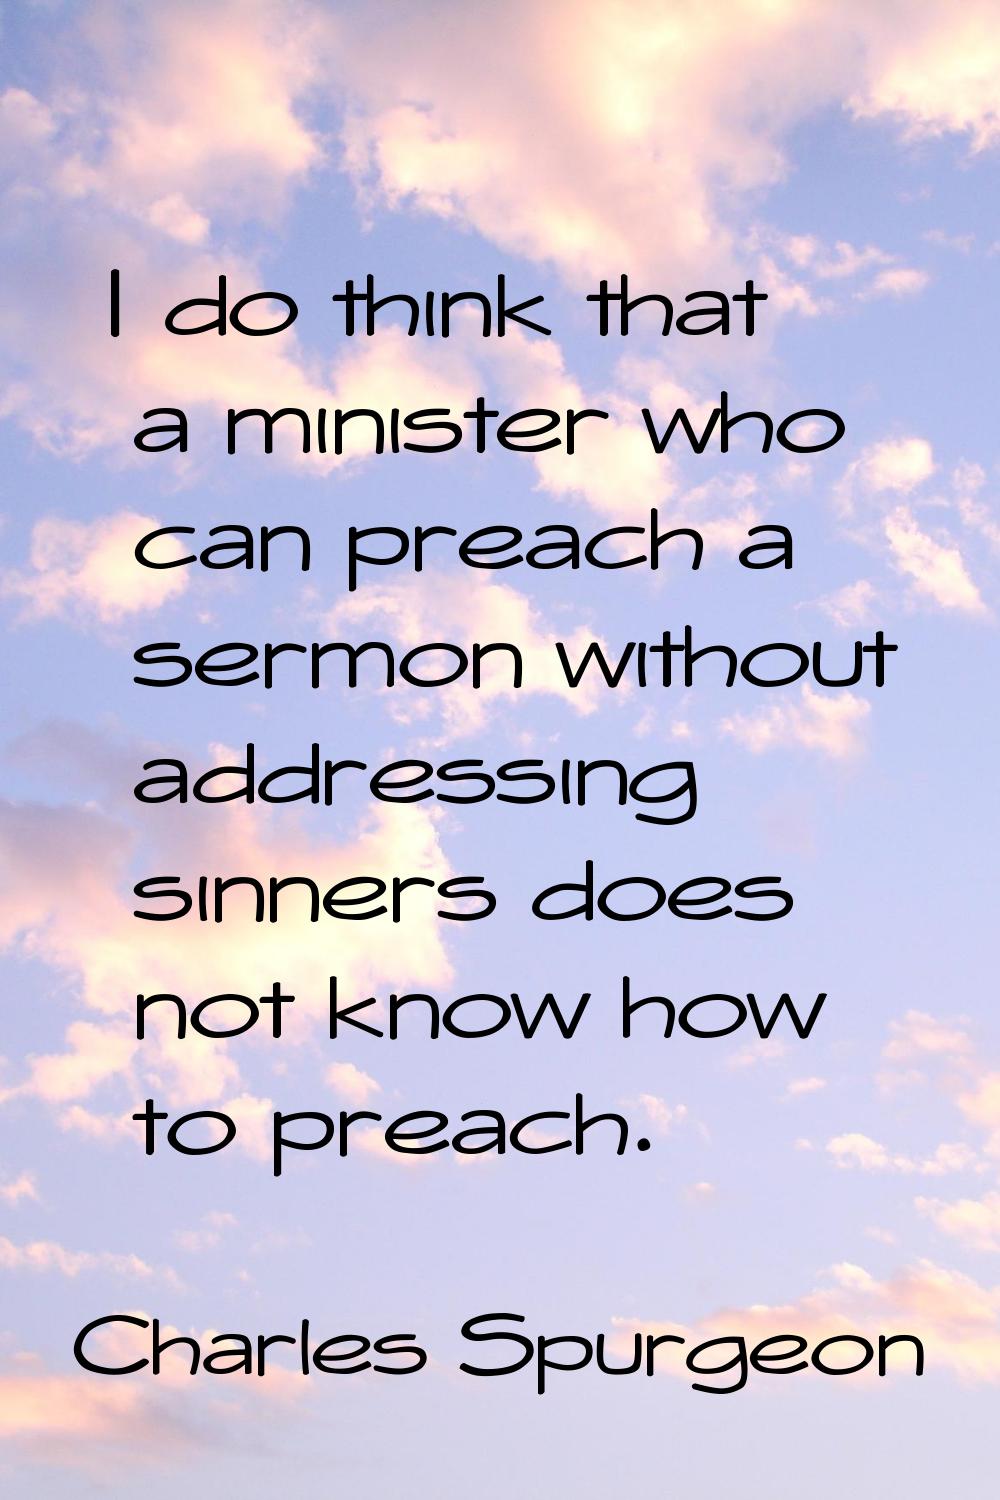 I do think that a minister who can preach a sermon without addressing sinners does not know how to 